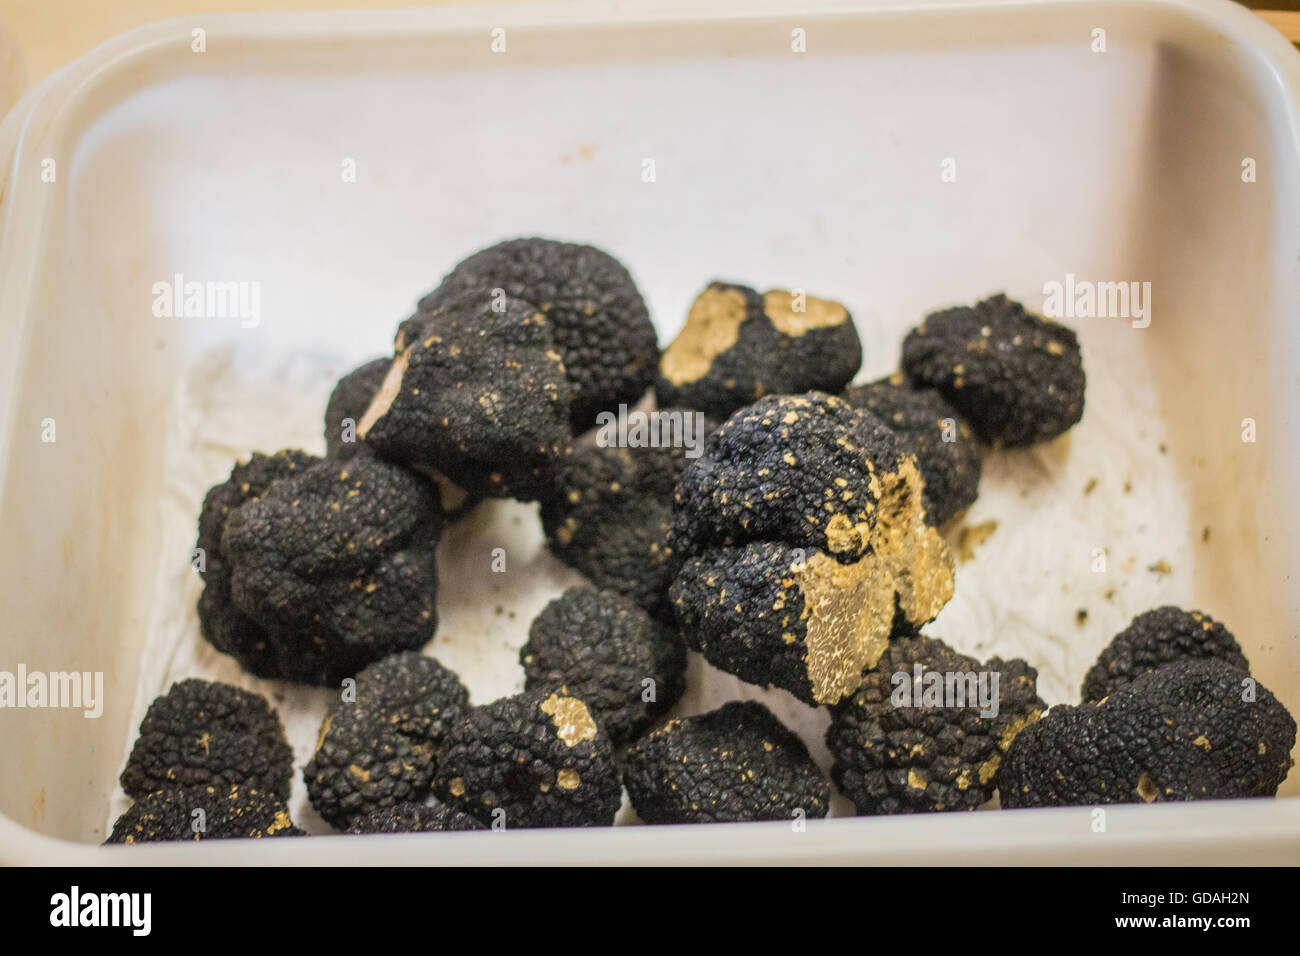 Several Black truffles in a plastic container Stock Photo